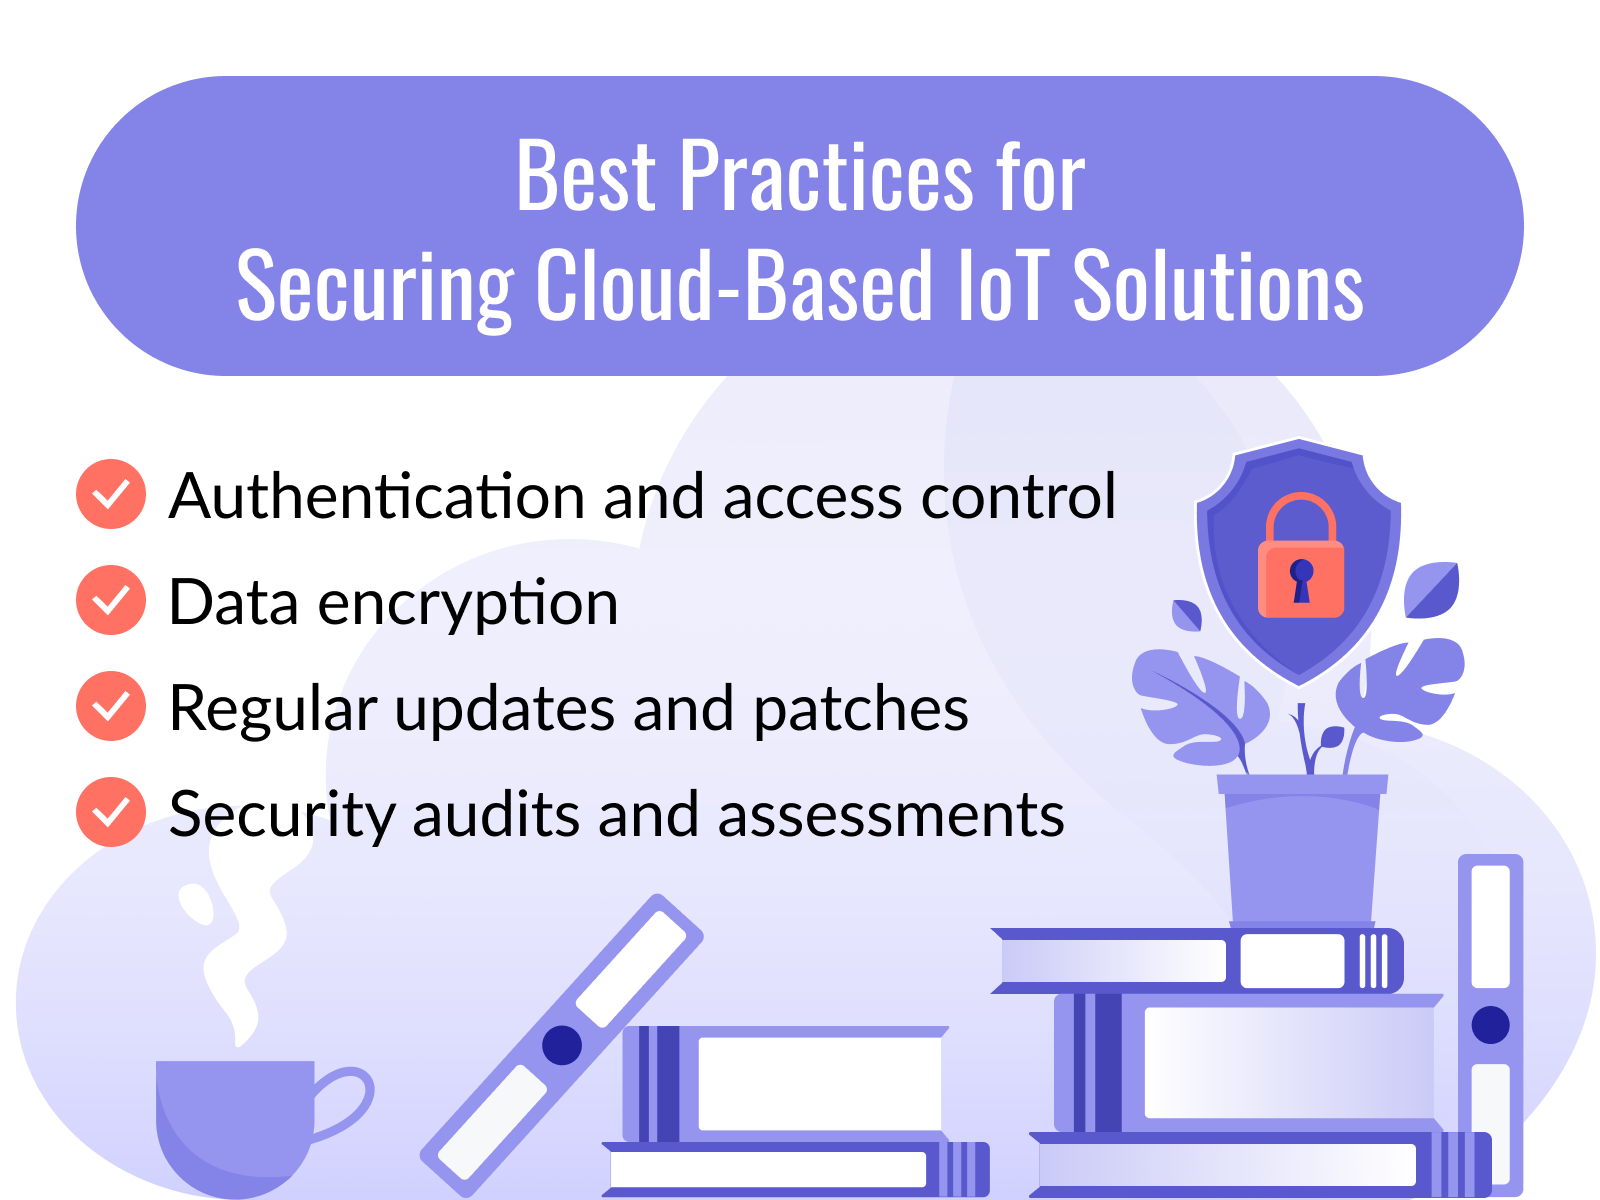 Best practices for cloud-based IoT solutions